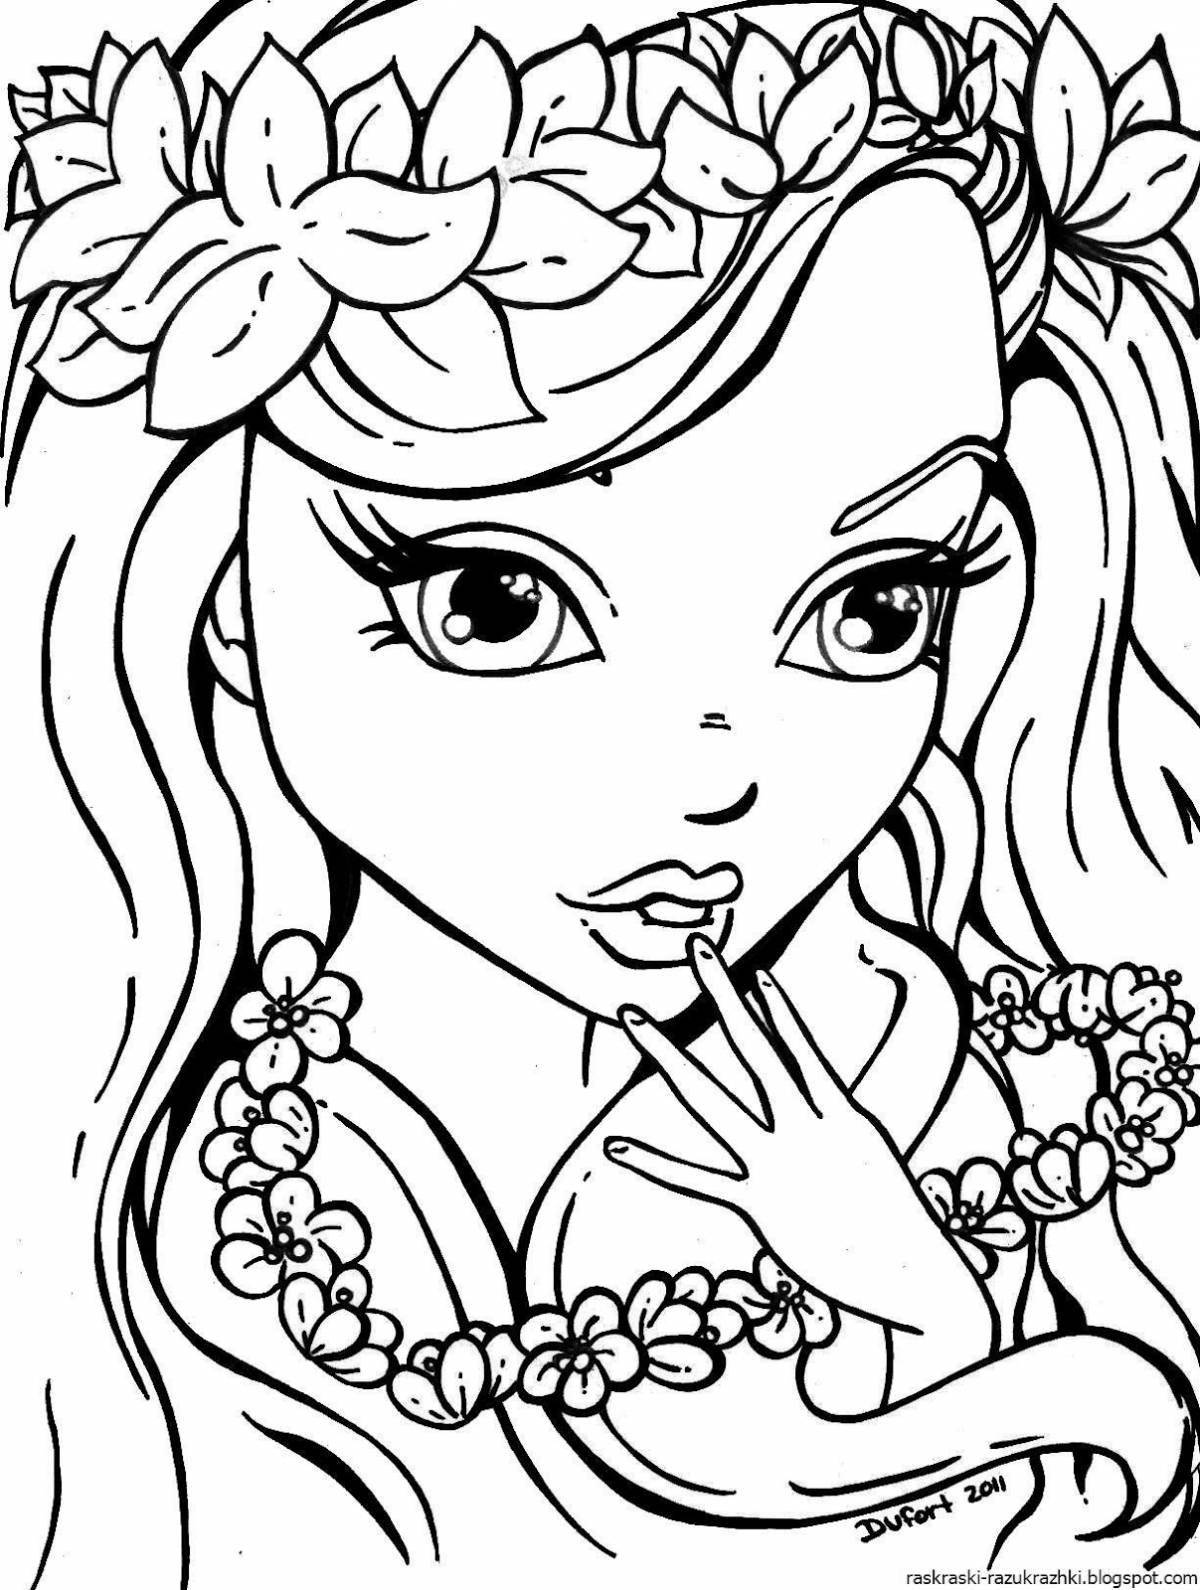 Crying paint coloring page